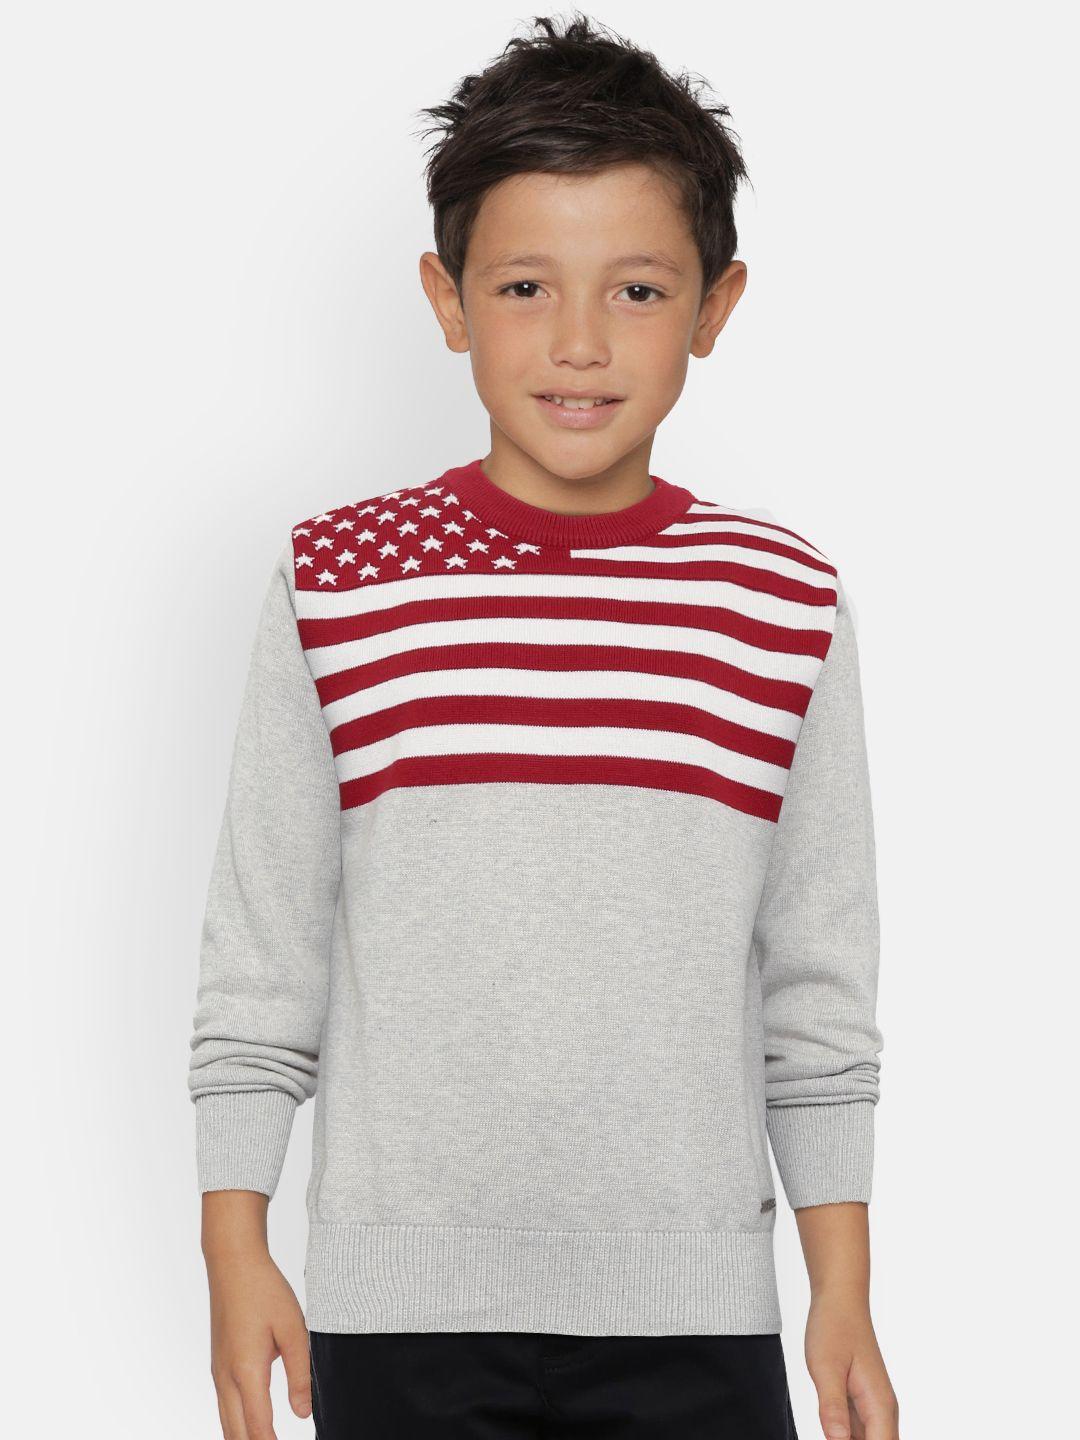 palm-tree-boys-grey-melange-&-red-striped-pullover-sweater